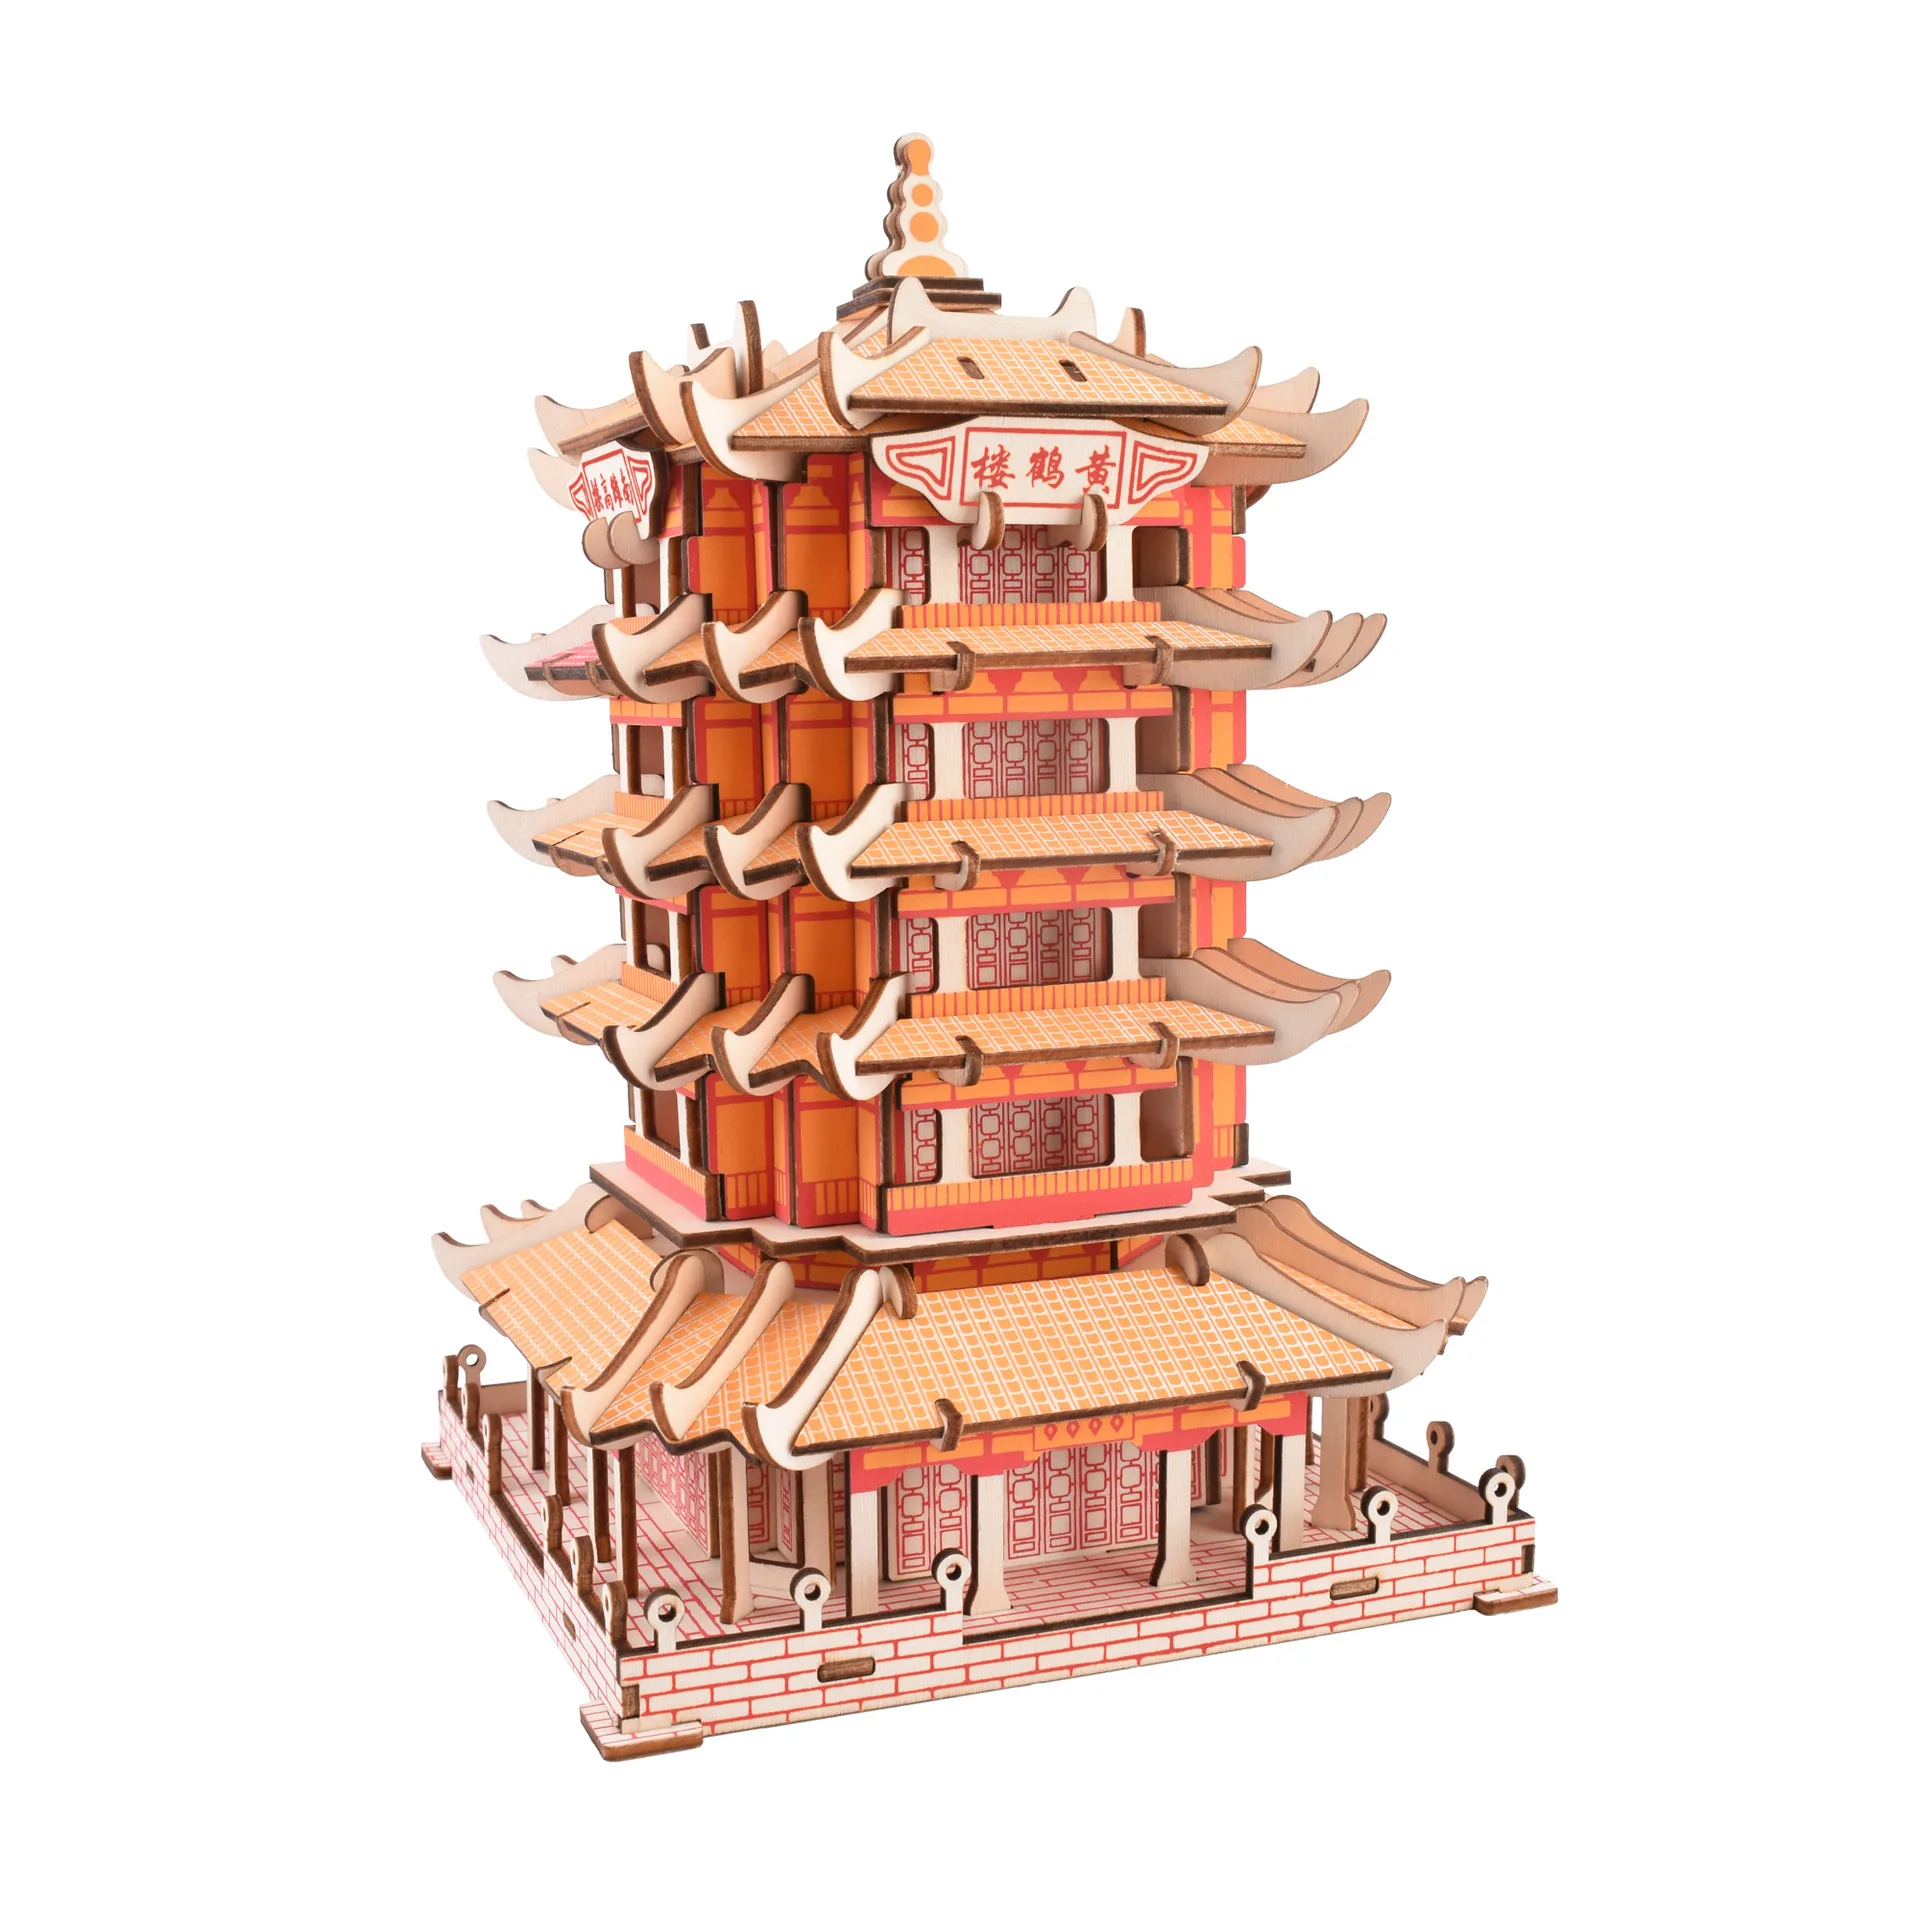 

China Yellow Crane Pavilion Huang He Tower 3D Puzzle DIY Wooden Toy Hand Work Girl boy Birthday Christmas Gift 1pc